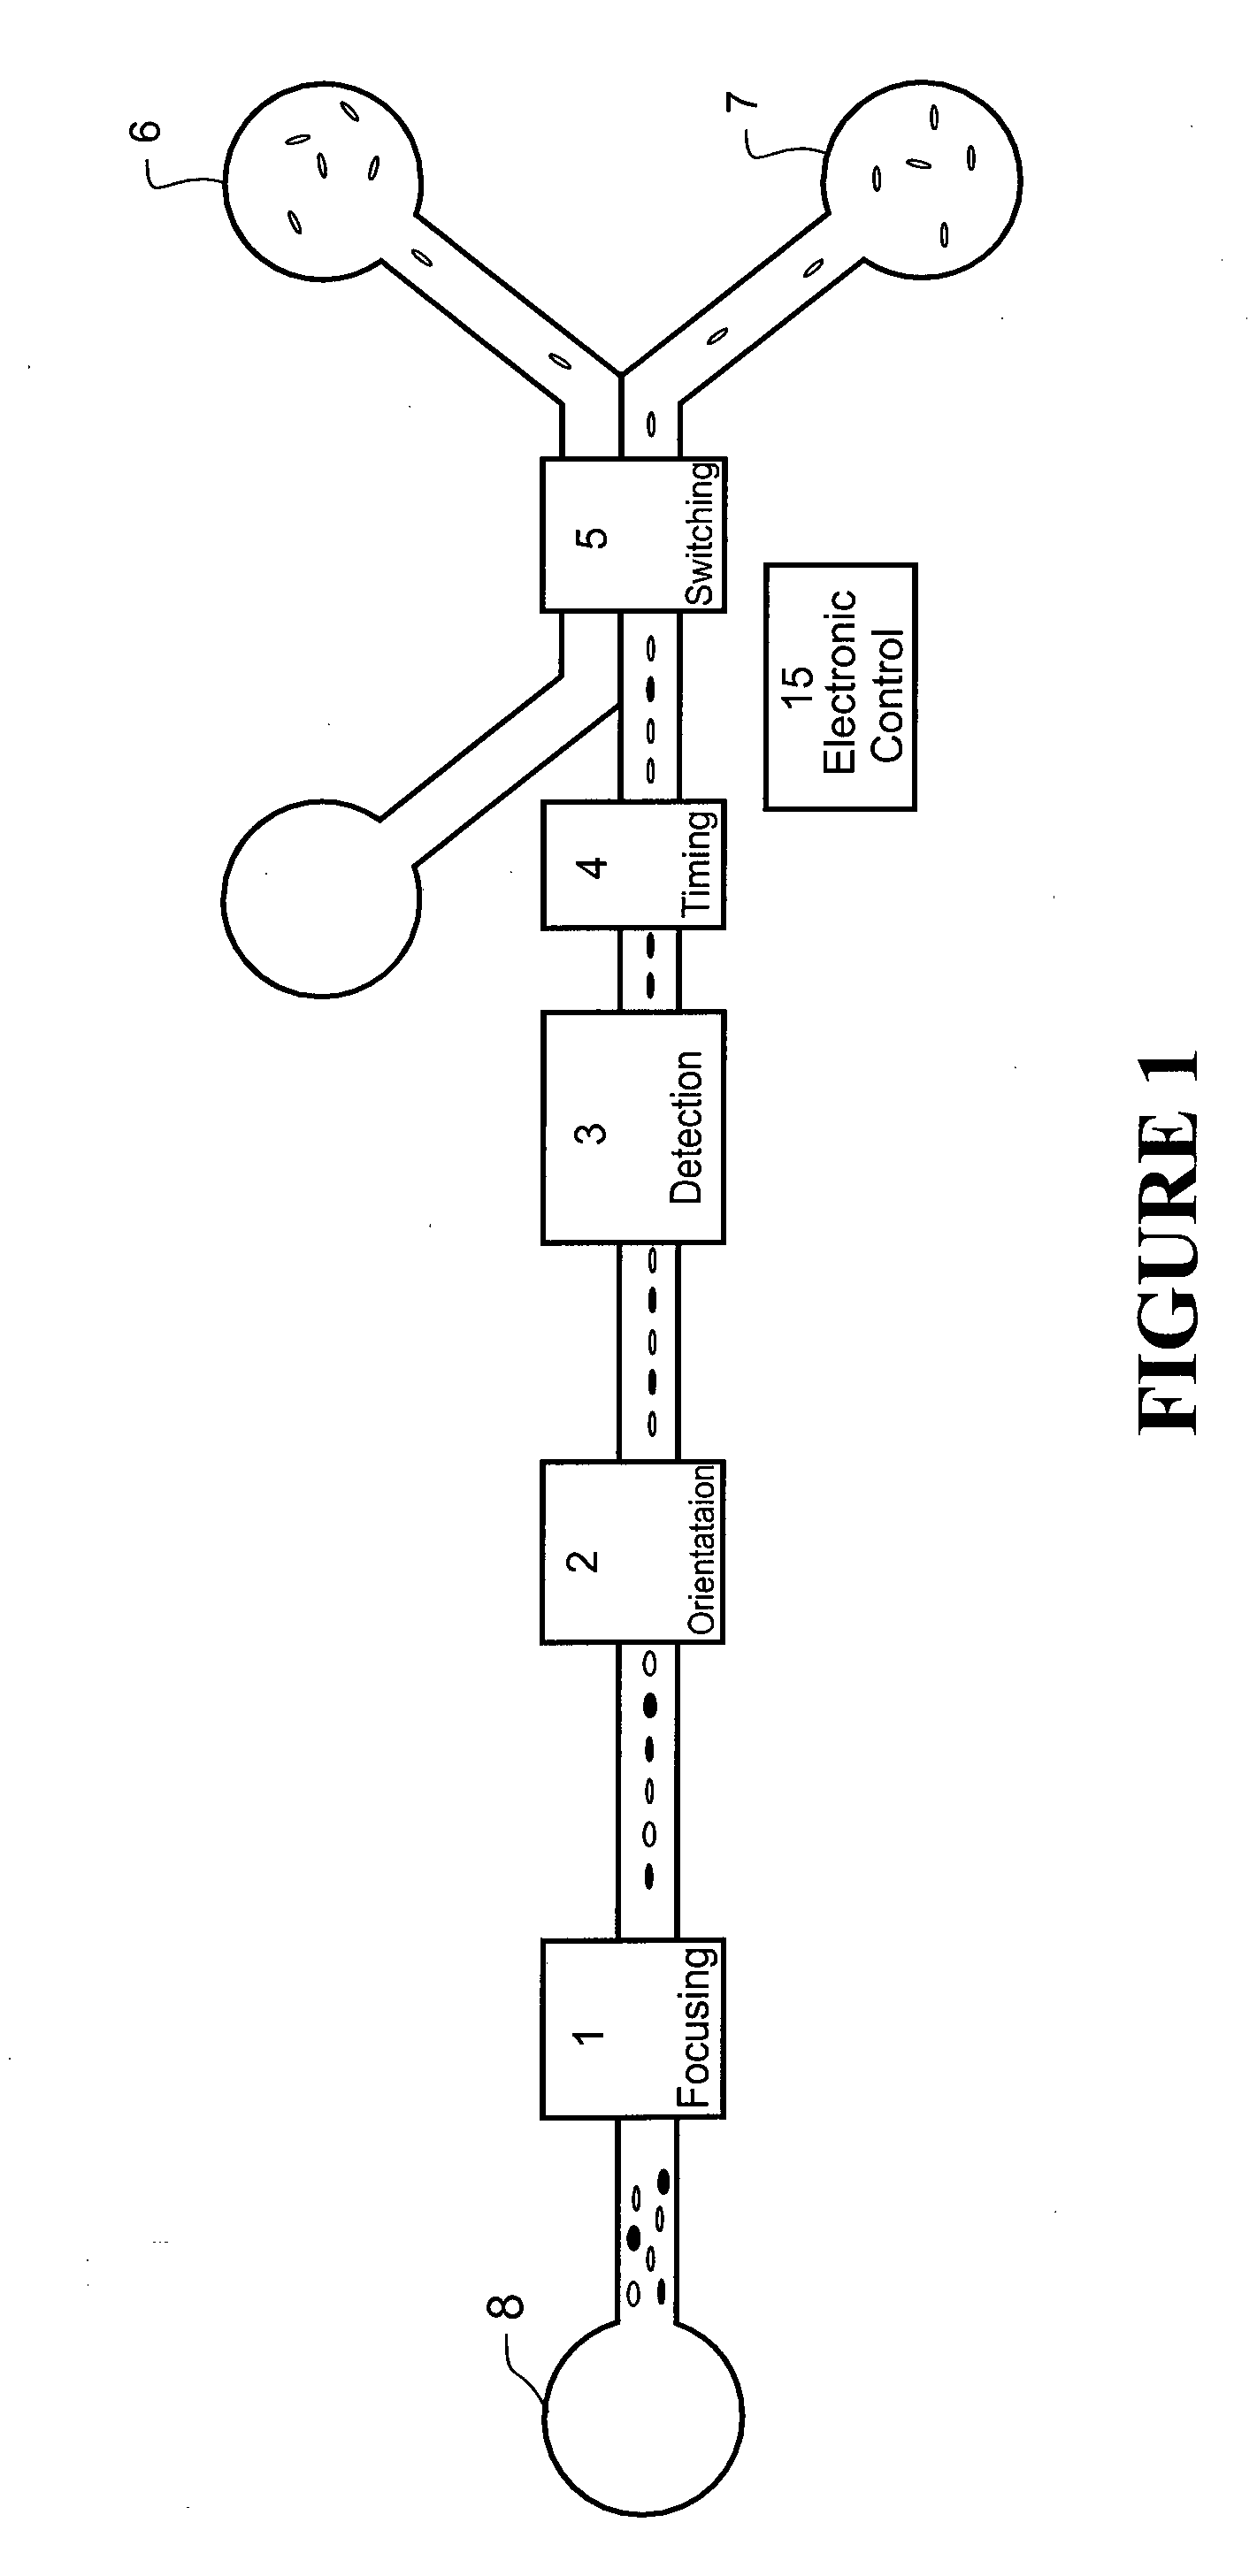 Method and System for Microfluidic Particle Orientation and/or Sorting